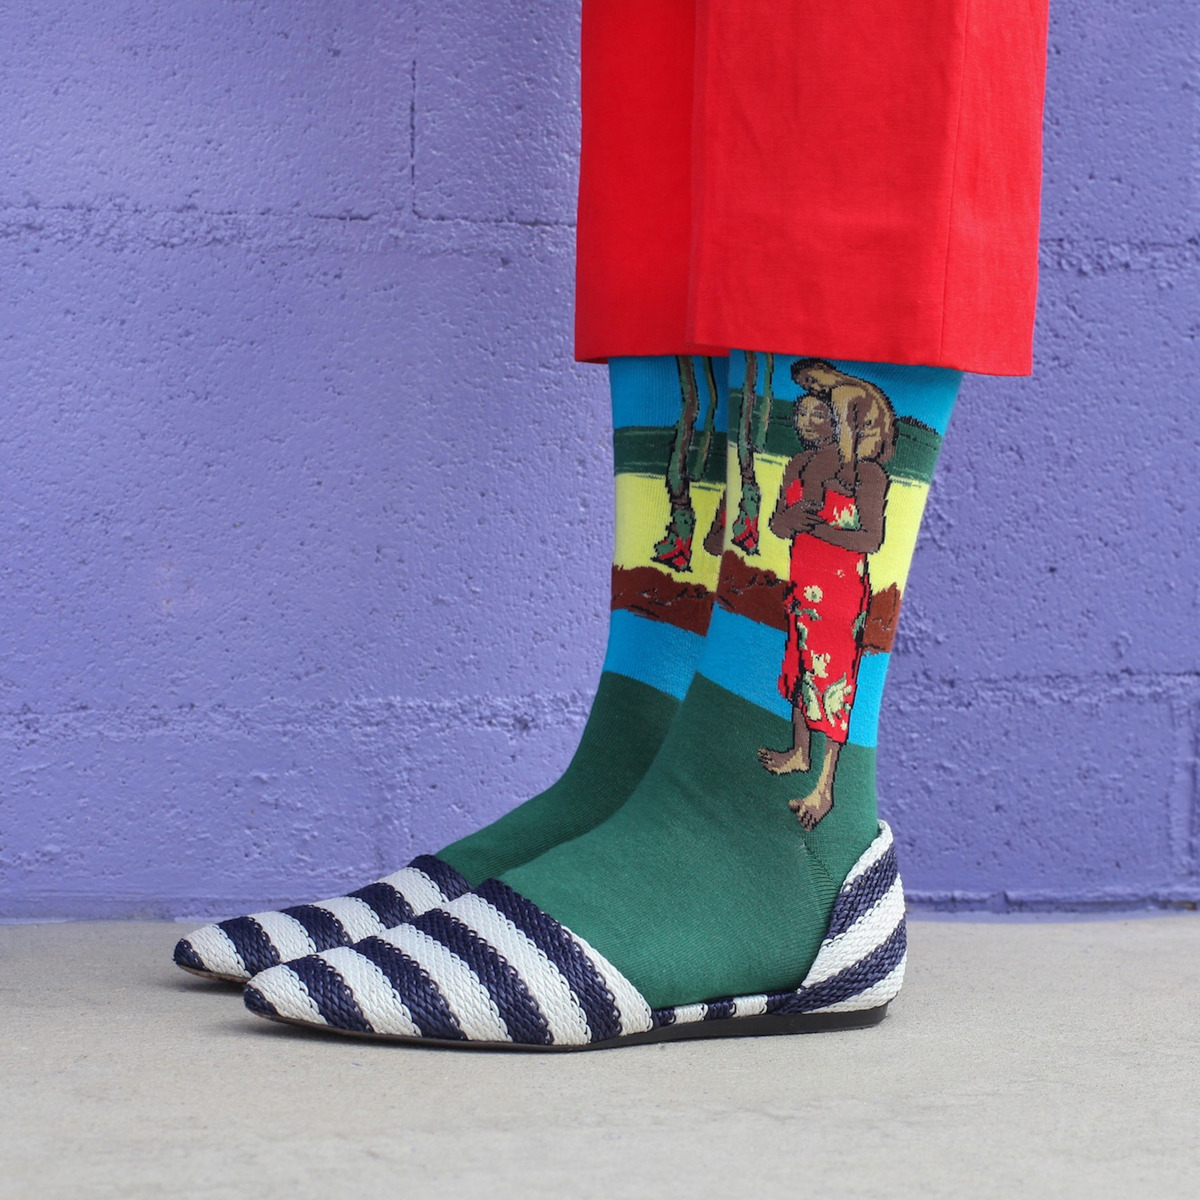 wildthicket:&ldquo;Art Socks,&rdquo; Stylist Kate Brien sees fashion from